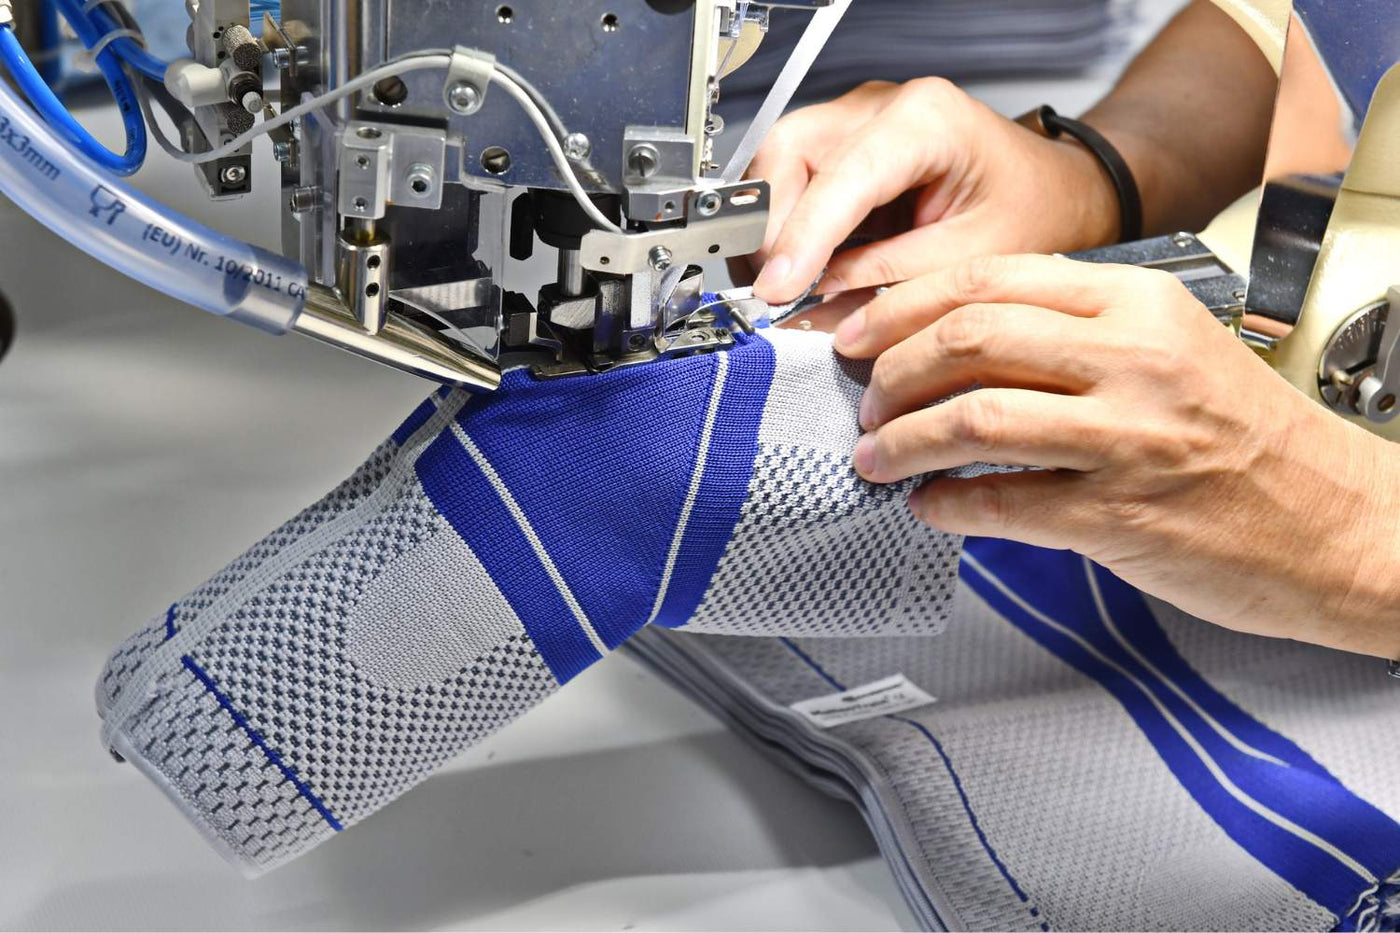 Bauerfeind employee machine-sewing one of patented Omega pads into a GenuTrain Knee Brace